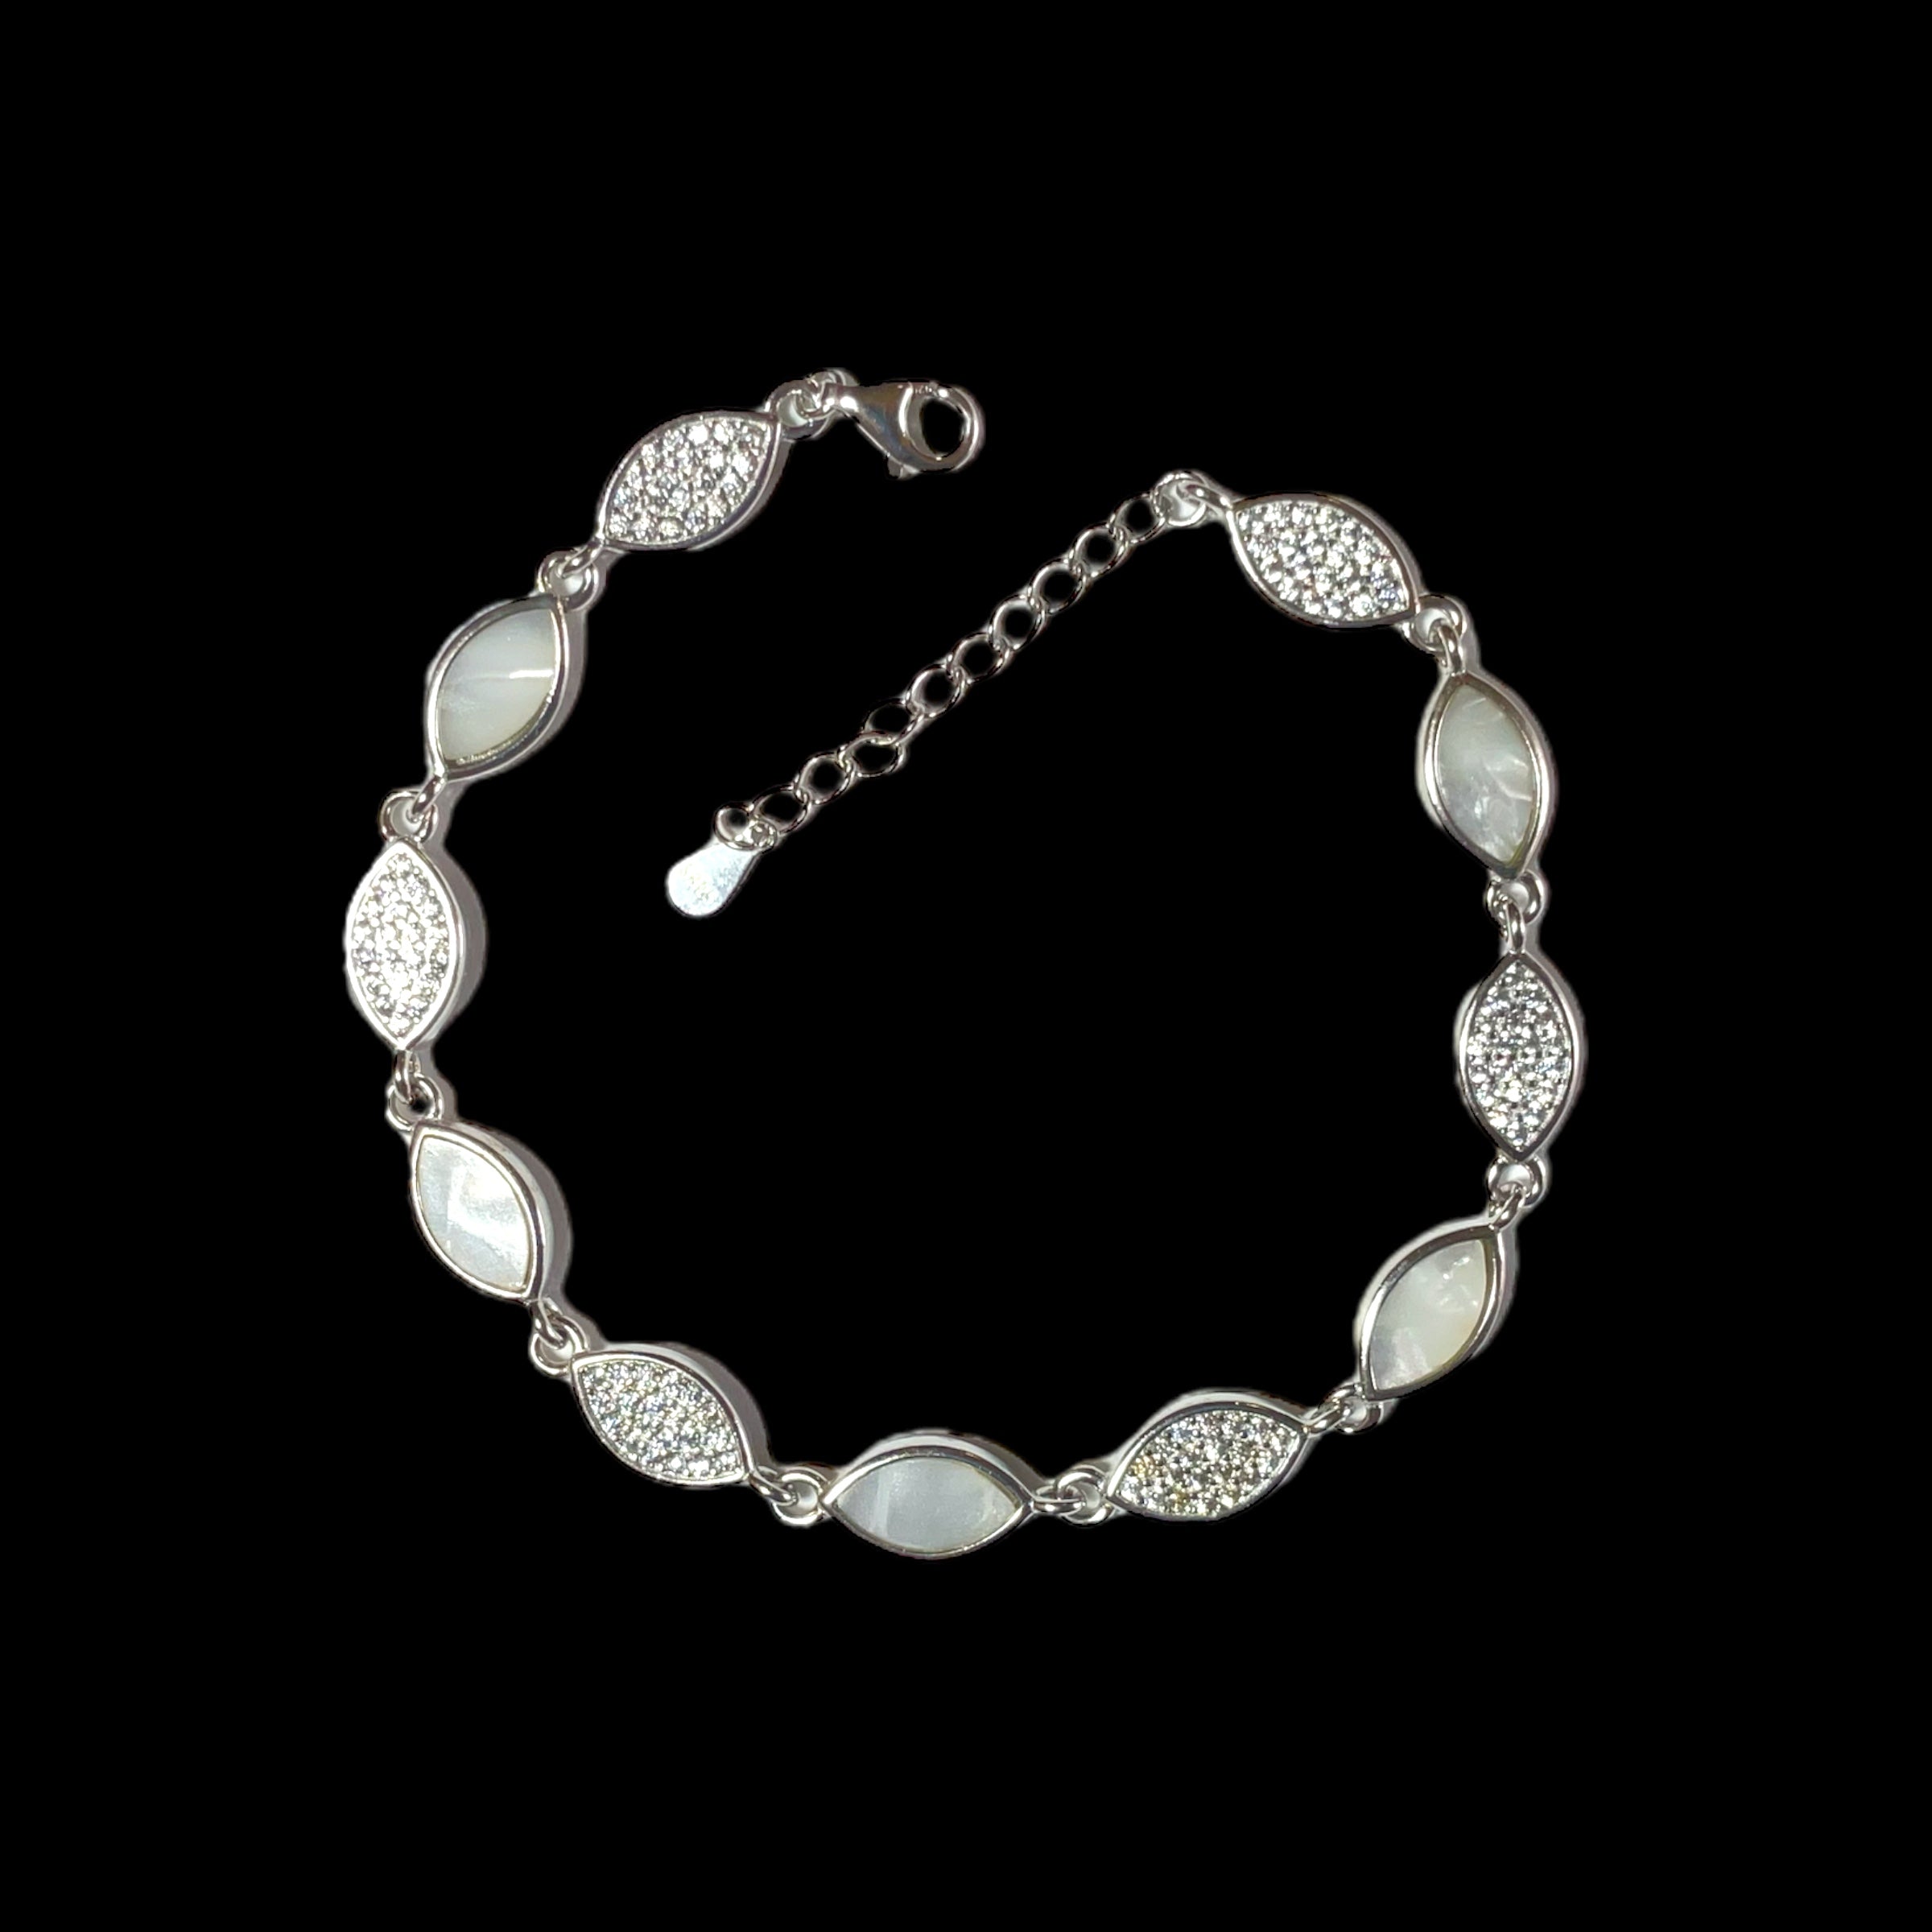 a silver bracelet with white stones on a black background